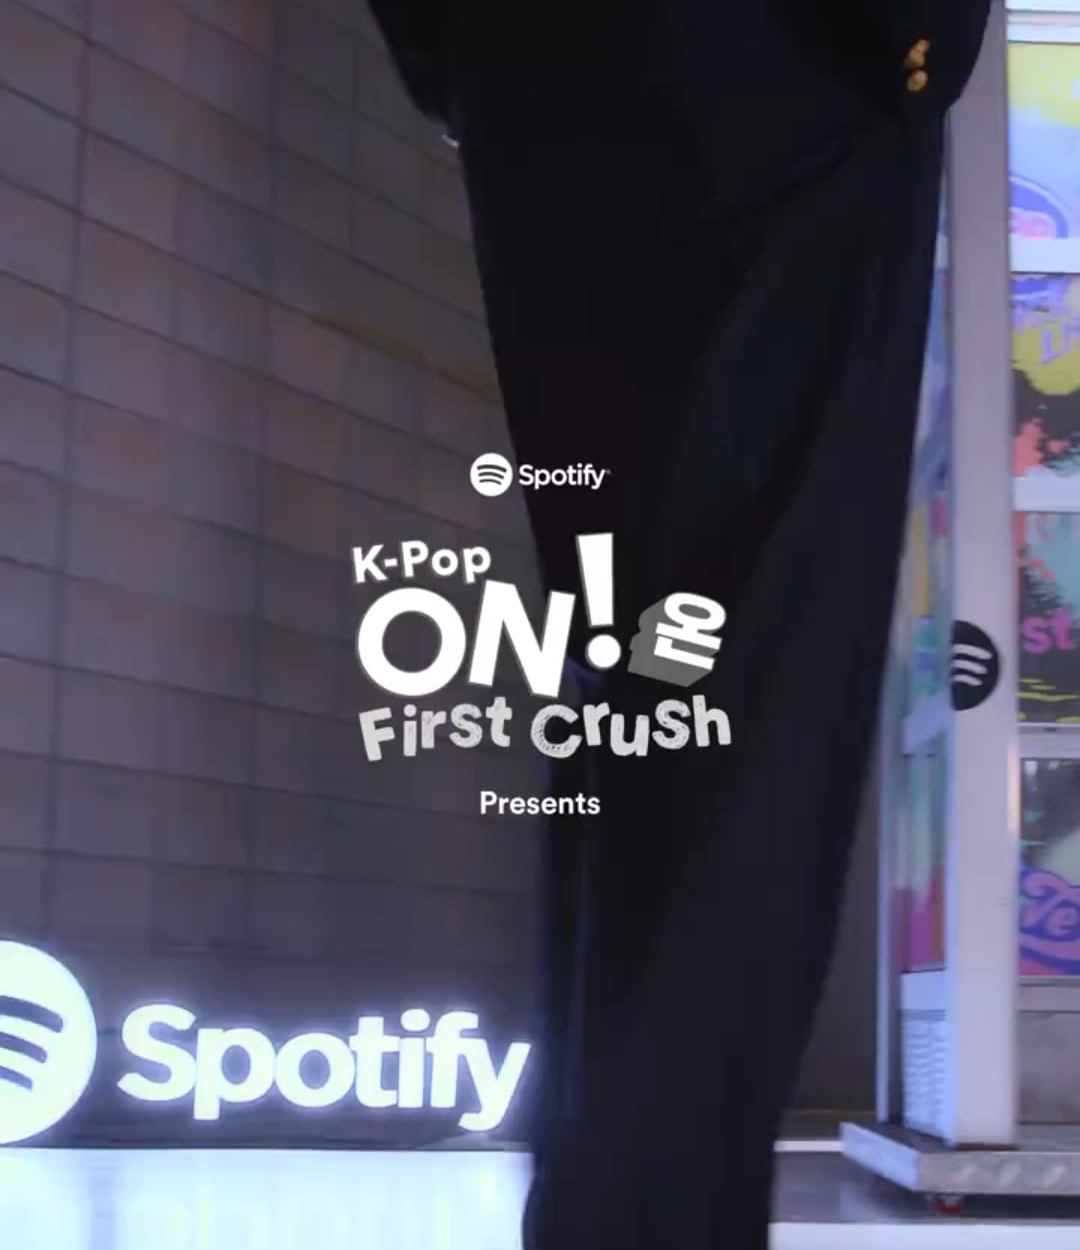 240212 Spotify K-Pop ON! First Crush cover single teaser